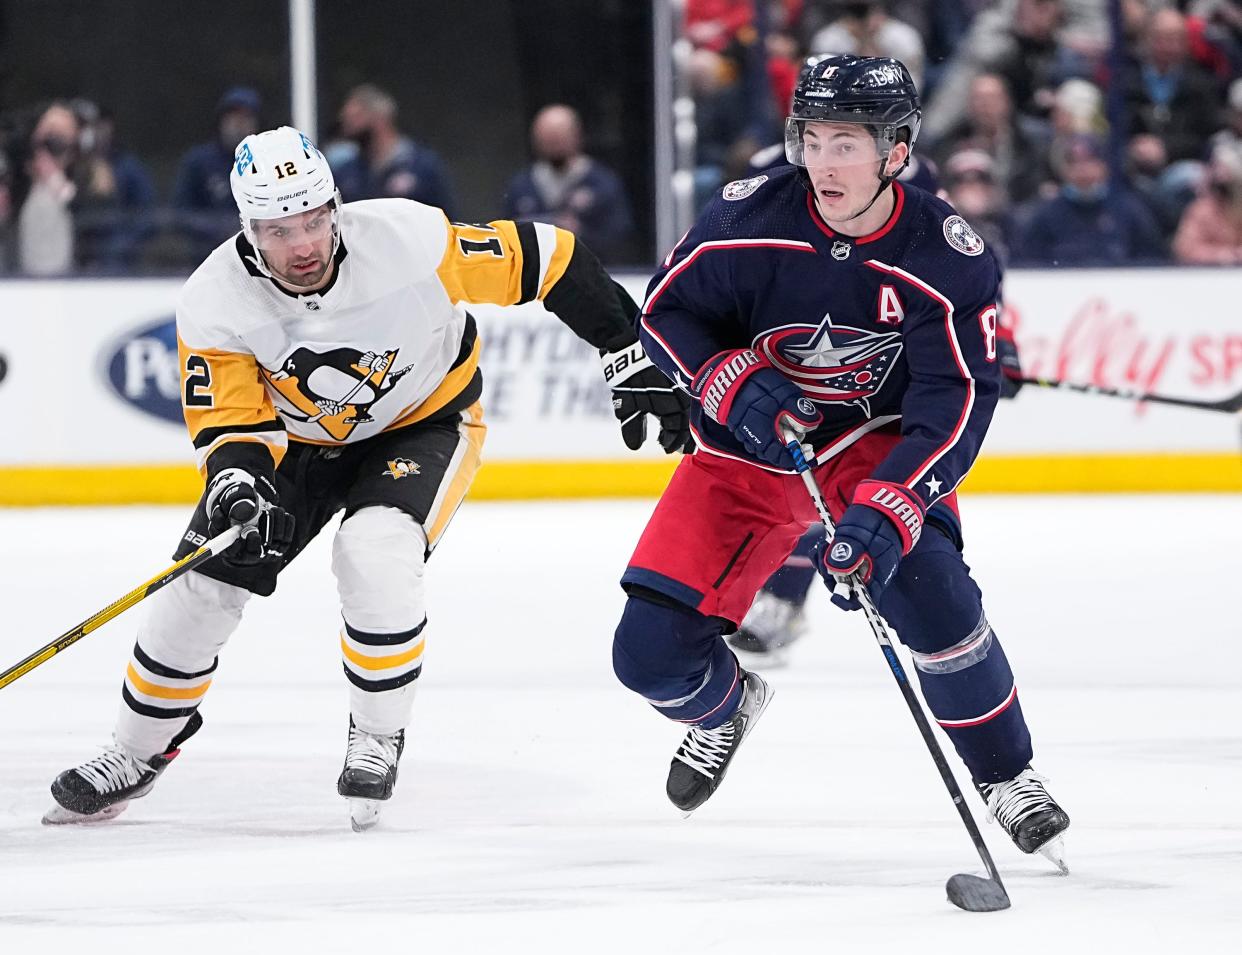 Blue Jackets defenseman Zach Werenski recorded 28:45 of ice time versus the Penguins Friday, one day after skating for 29:58 against the Flyers.